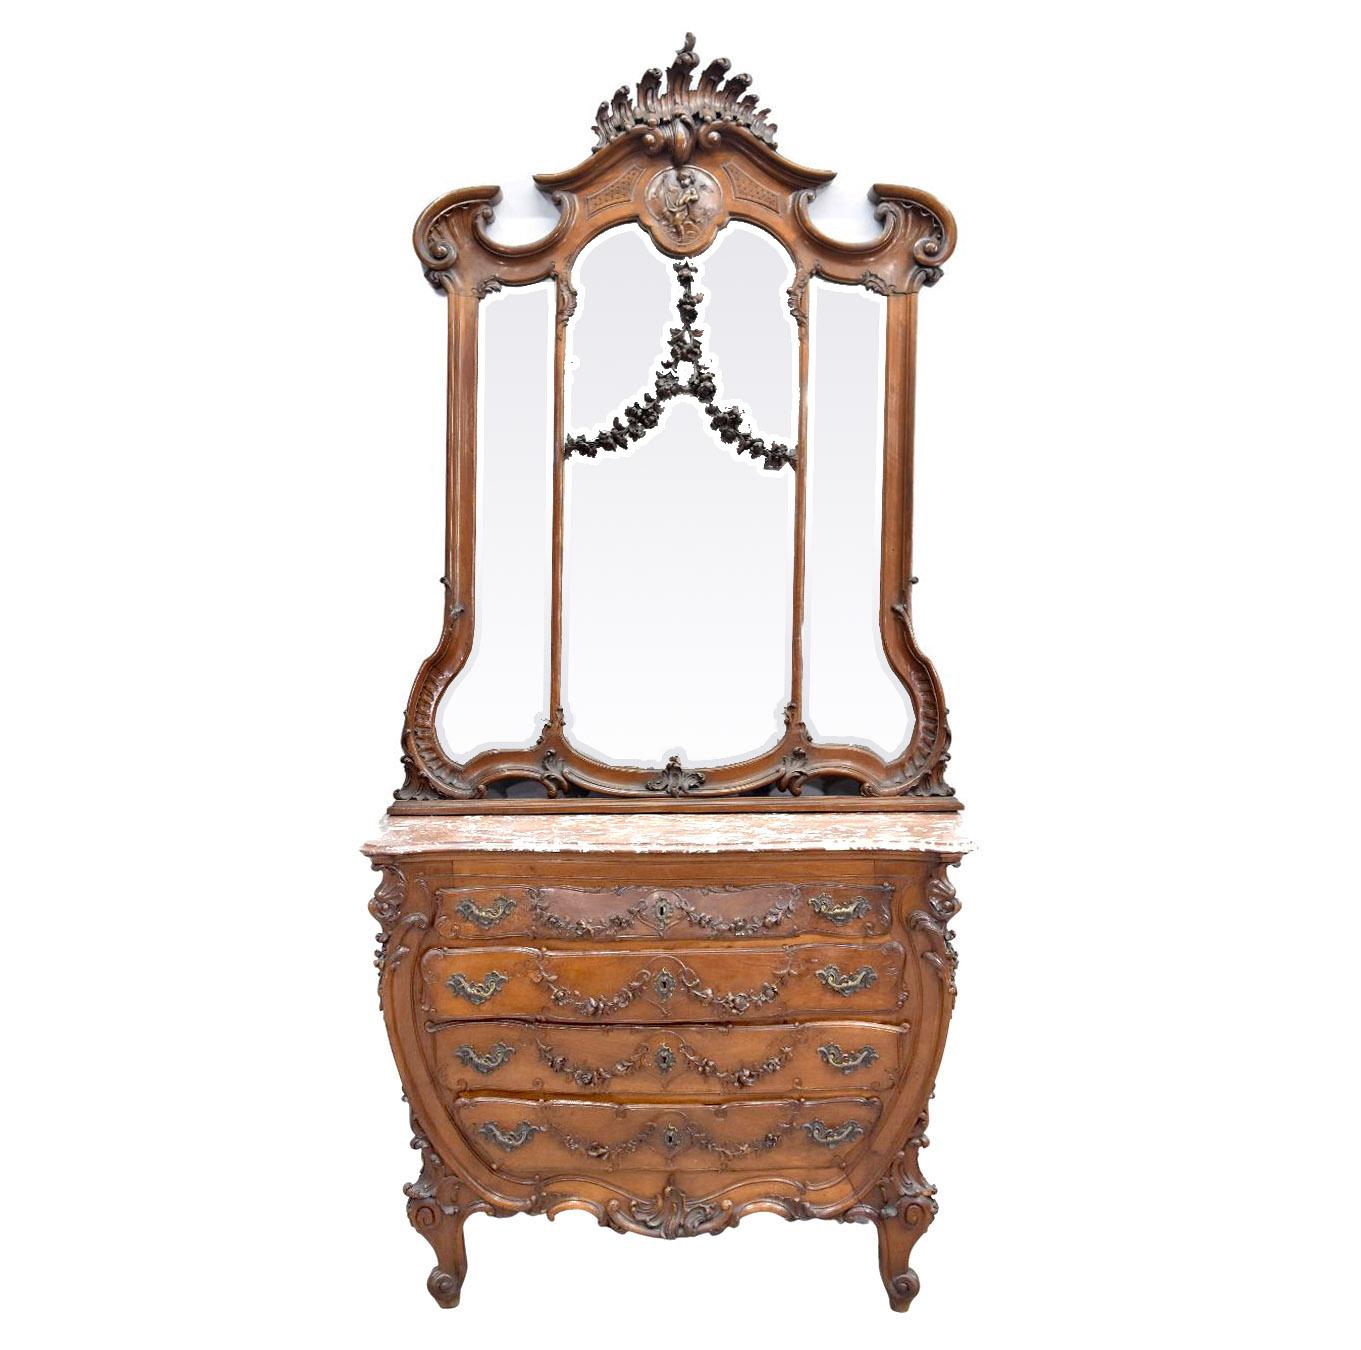 19th Baroque Louis XV Rococo Style mirror cabinet walnut dressing table with Putti richly carved. Part of a set including a wardrobe, a bed, a pair bedside tables.